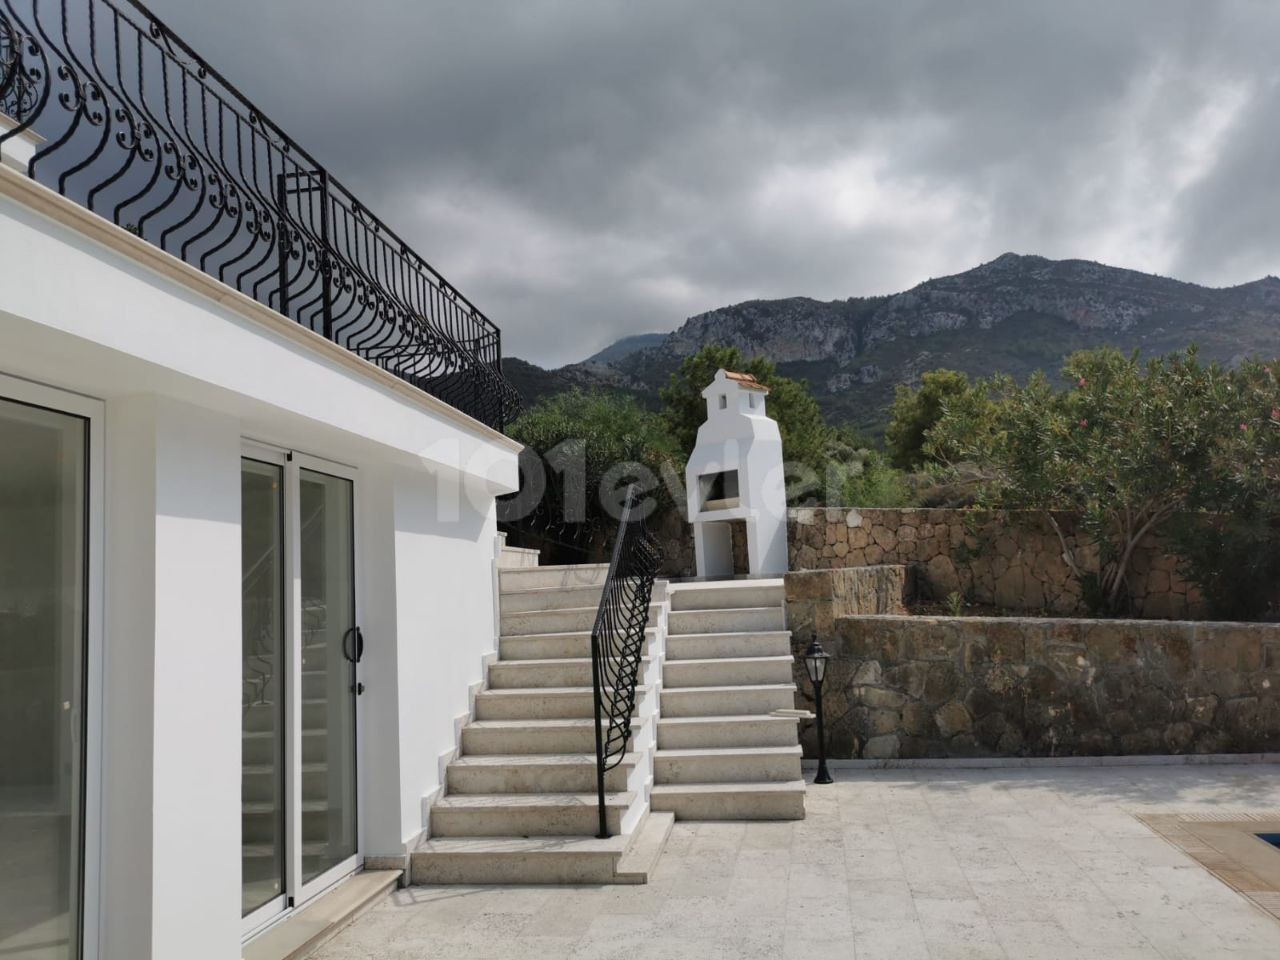 4 Bedroom unfurnished Villa Llogara Private Pool, Private Location + Gas central Heating (Can also be rented Furnished for 1.550 GBP) ** 